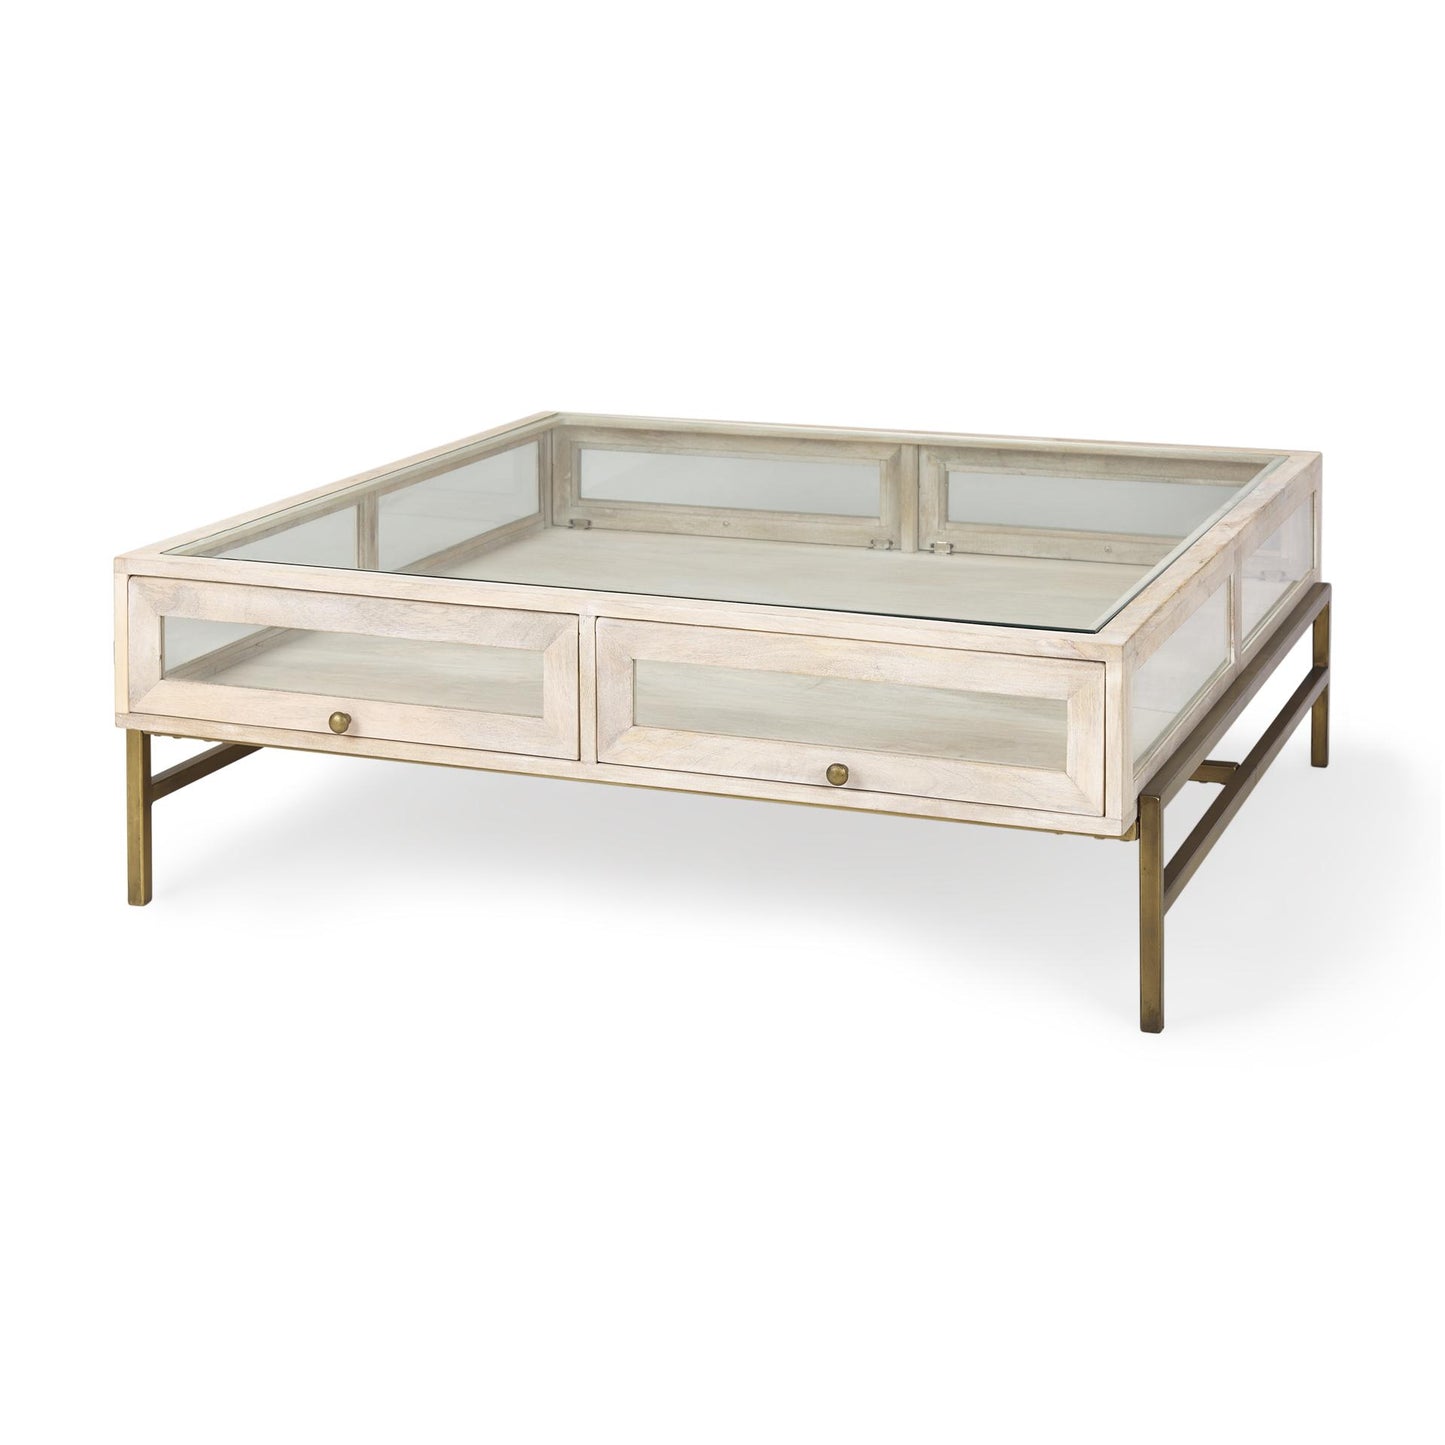 Arelius 42L x 42W x 15H White Wood W/ Gold Metal Base Square Display Coffee Table